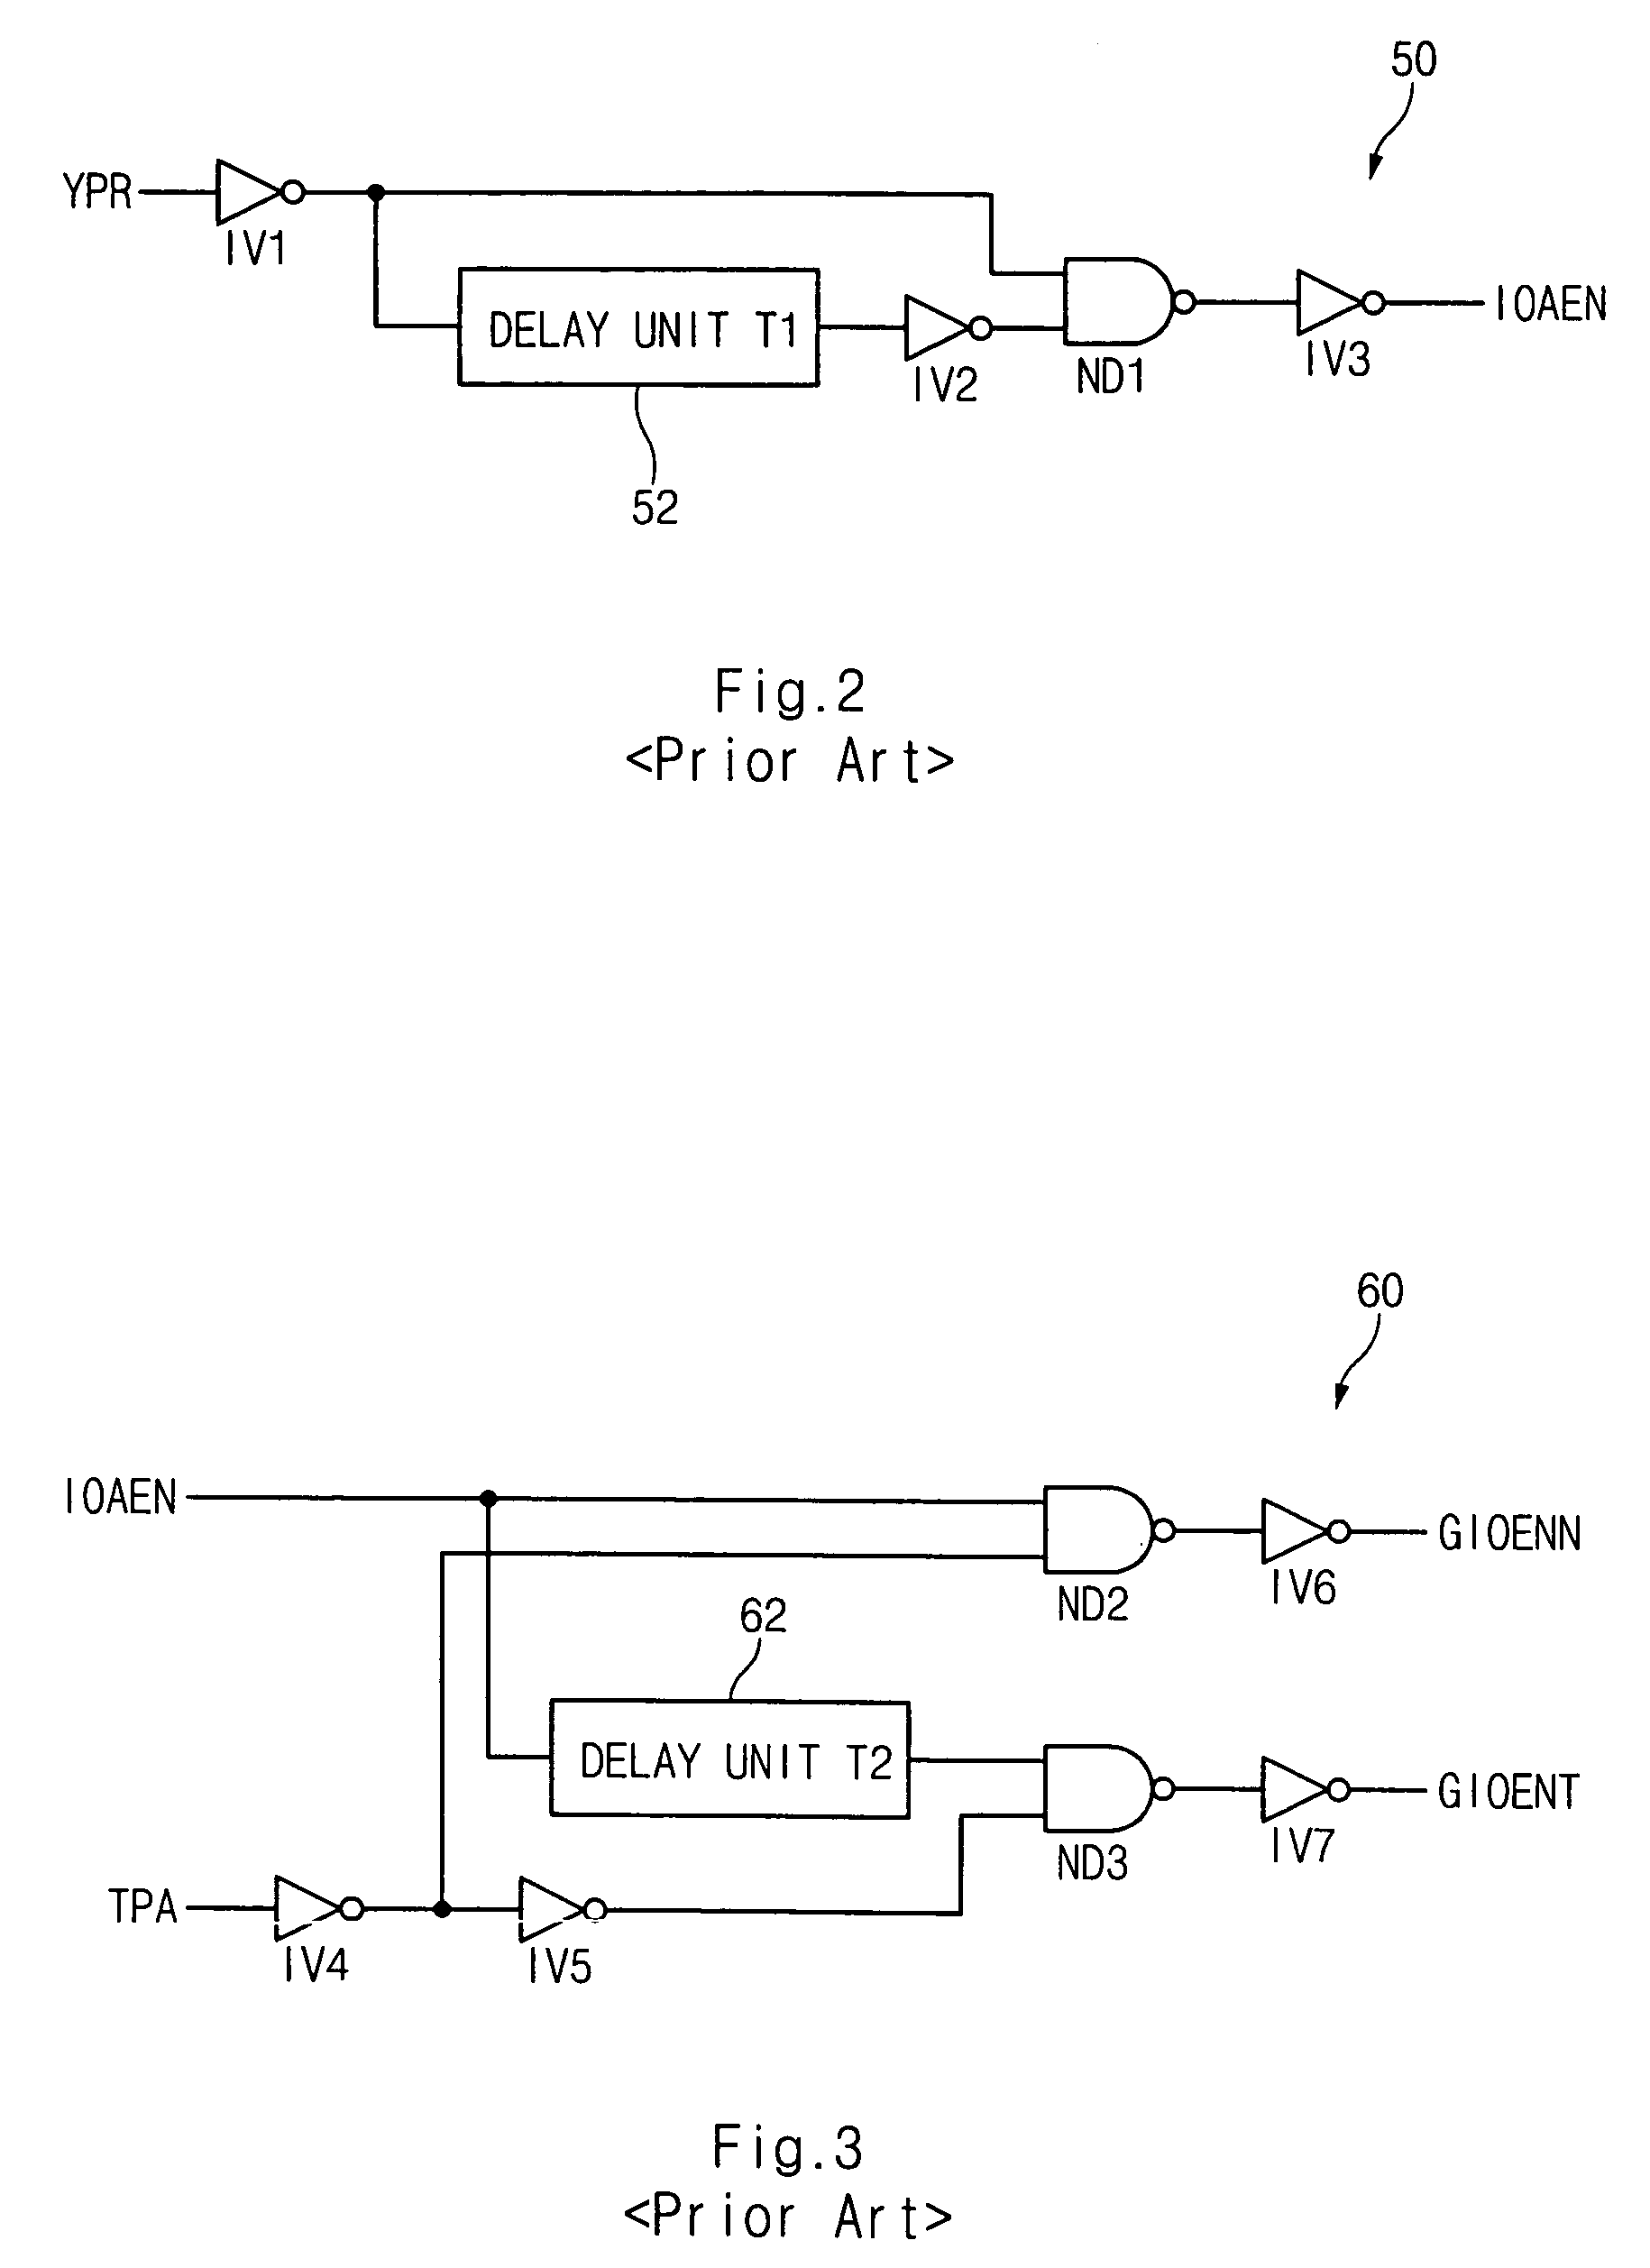 Parallel compression test circuit of memory device